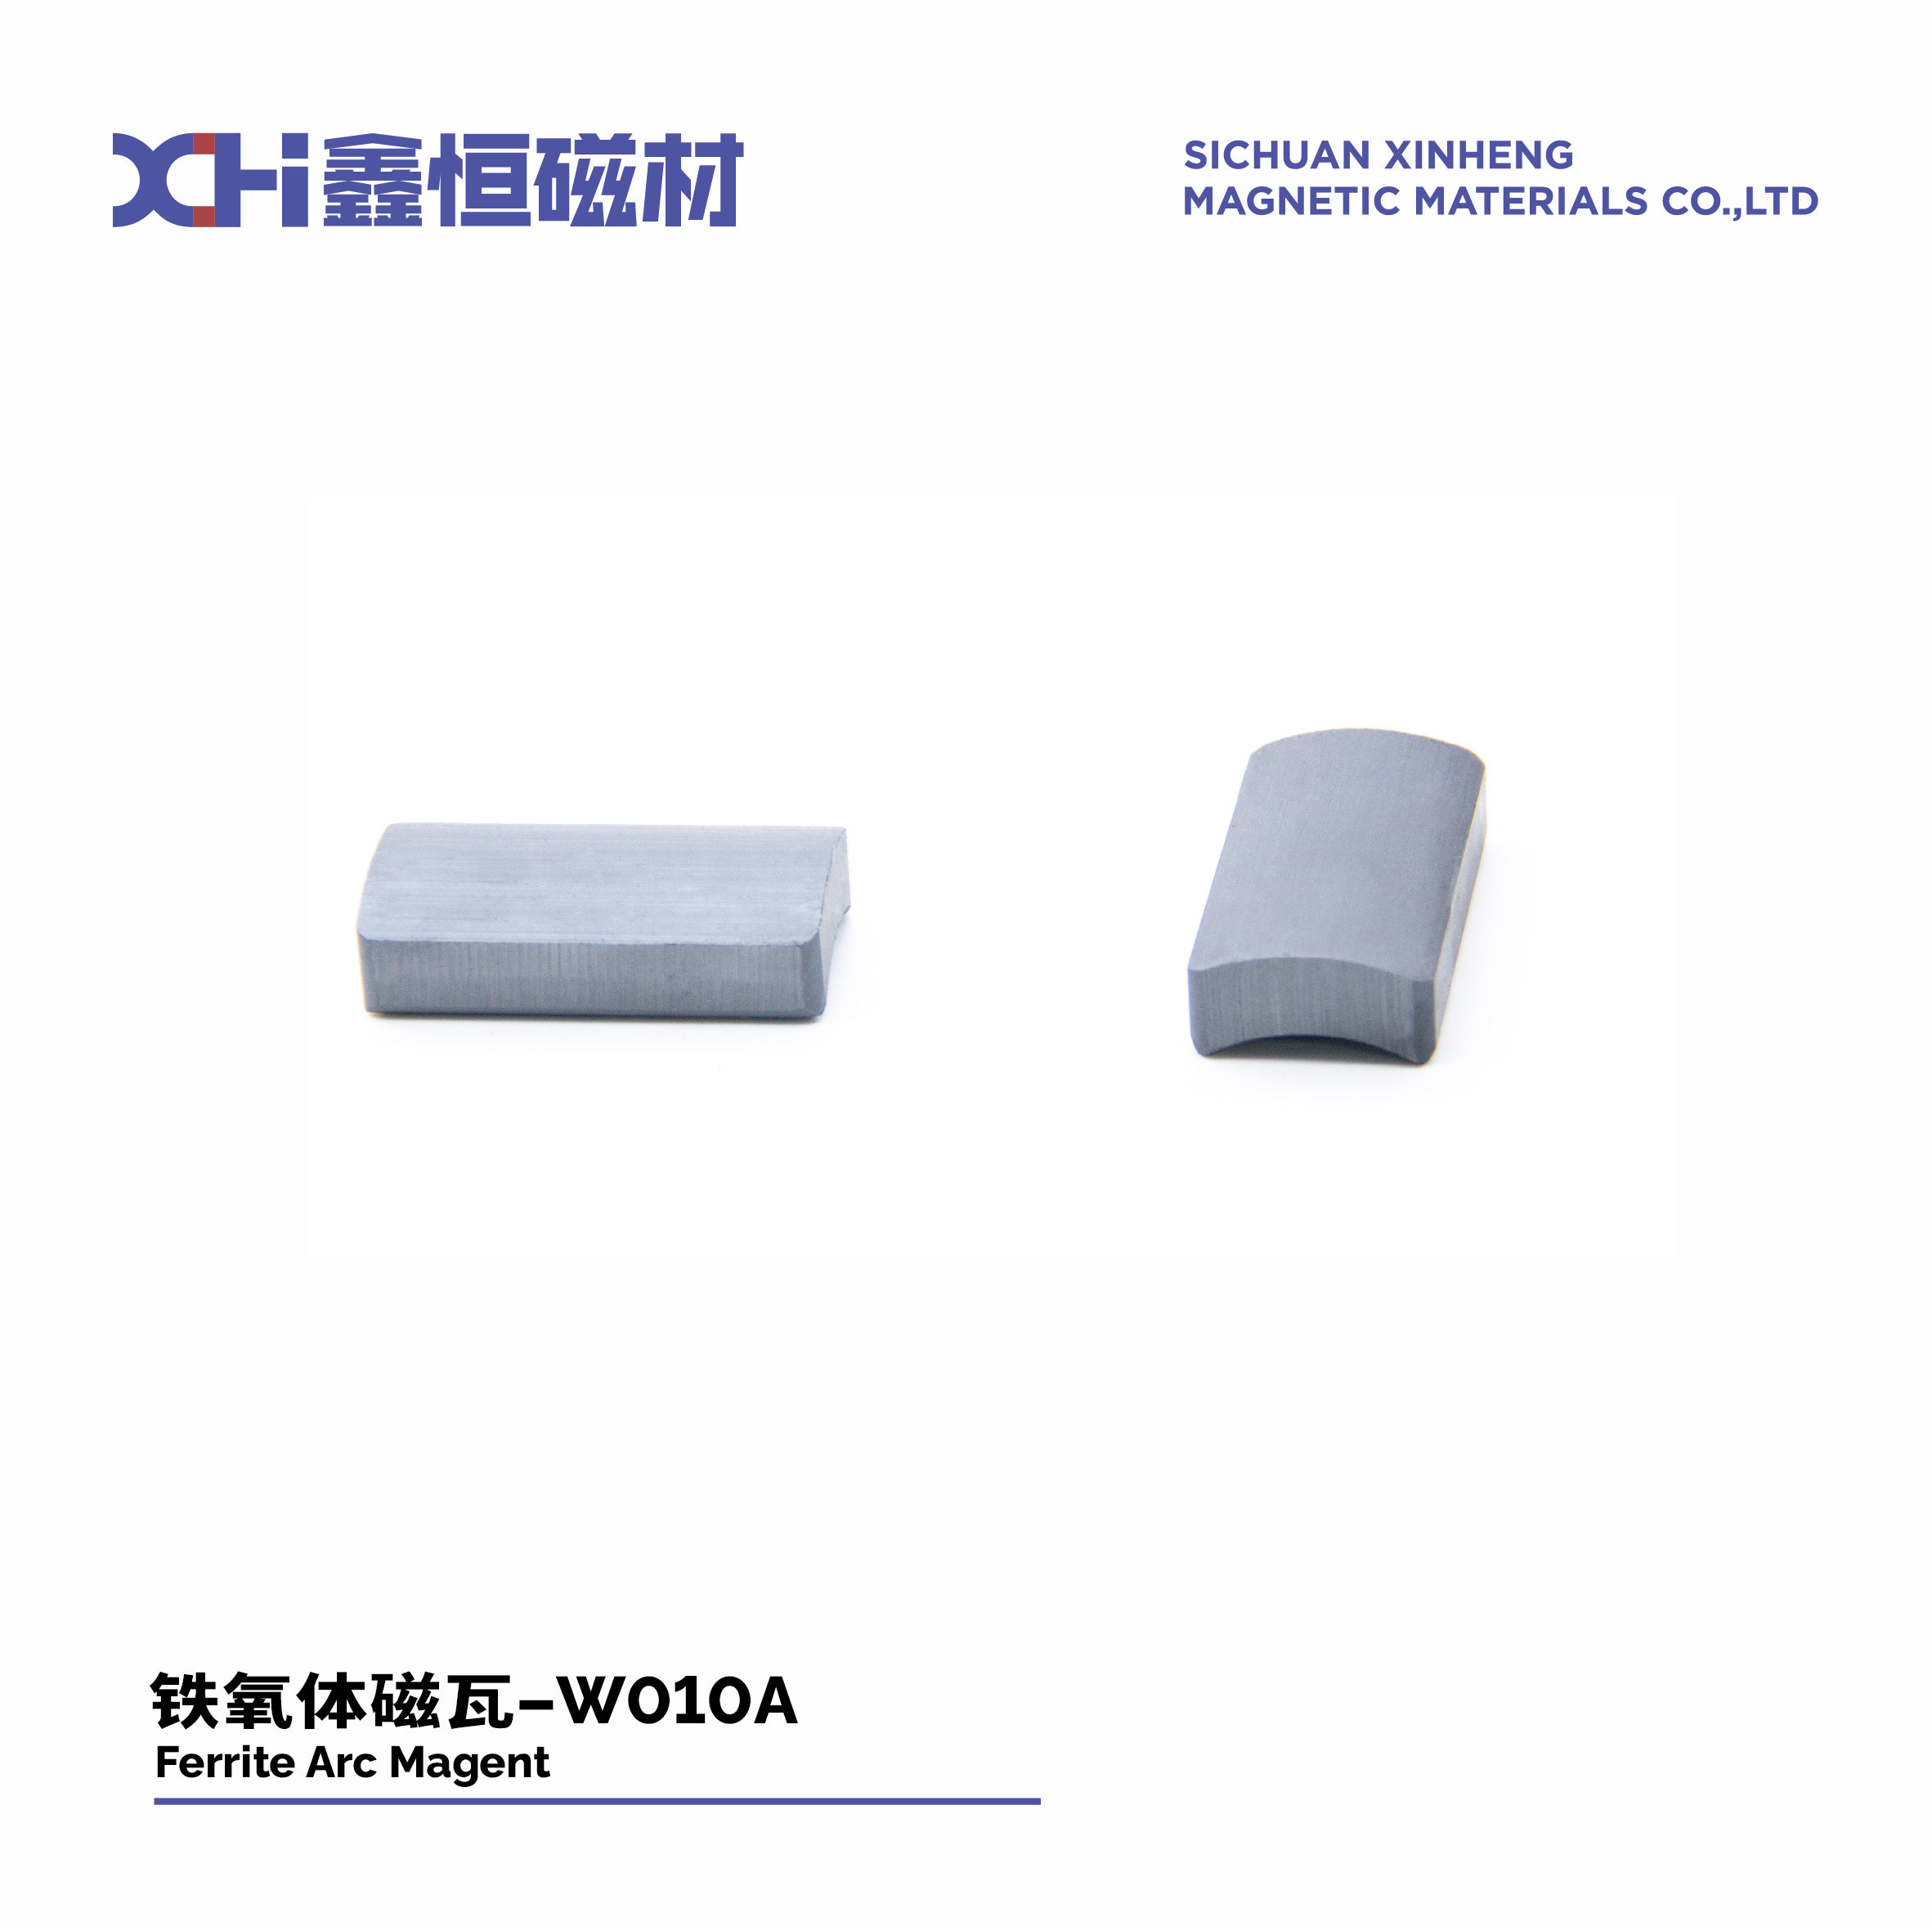 Curved Permanent Magnet Ferrite Molded By High Pressure Is Used In Universal Motors W010A